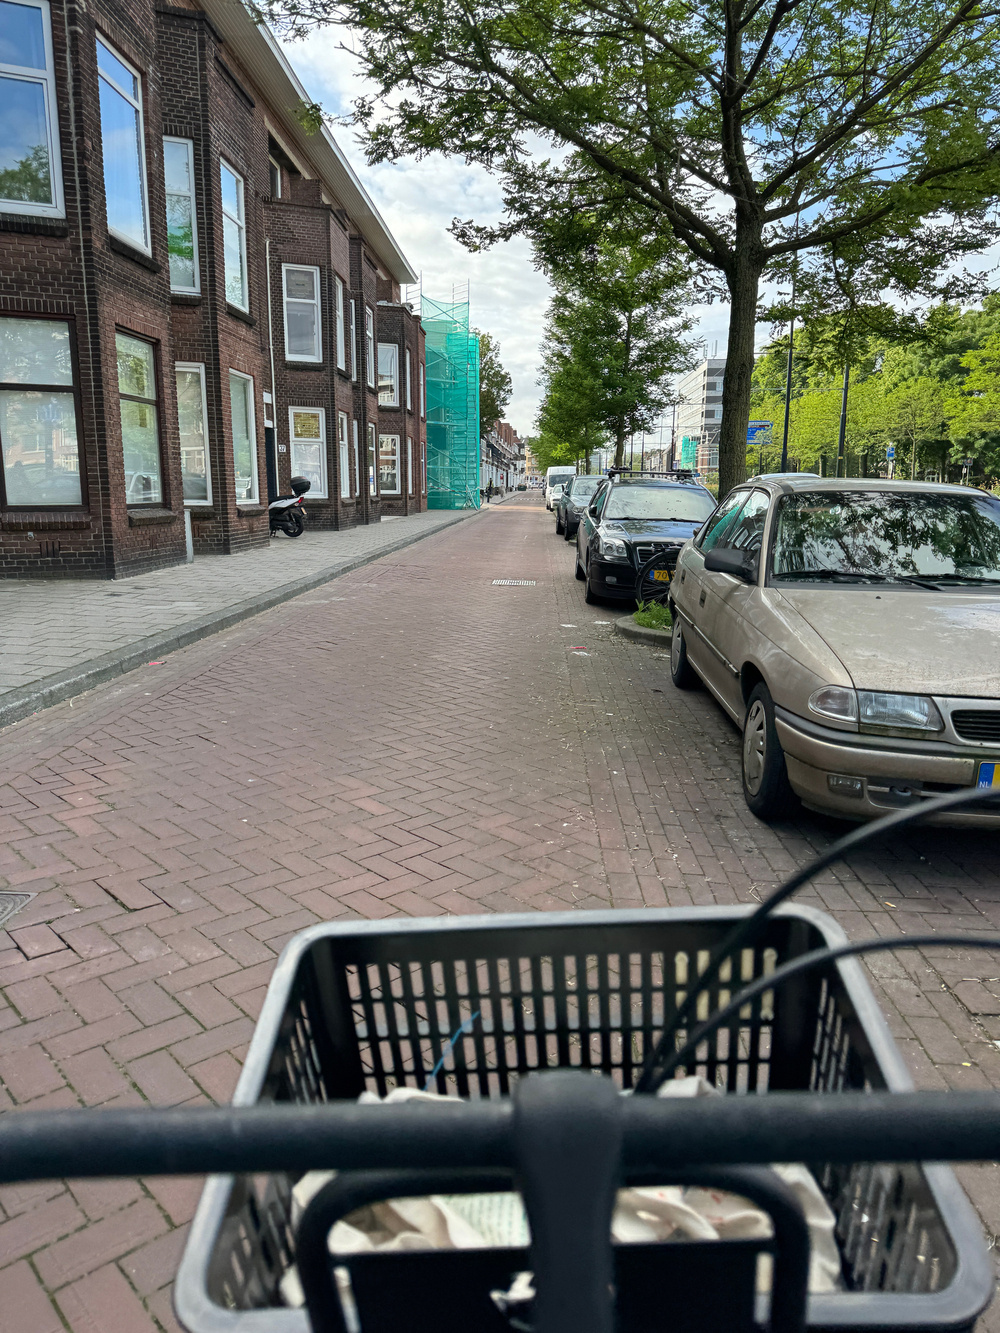 Auto-generated description: A quiet street is lined with parked cars and trees, with the view taken from the front of a bicycle basket.